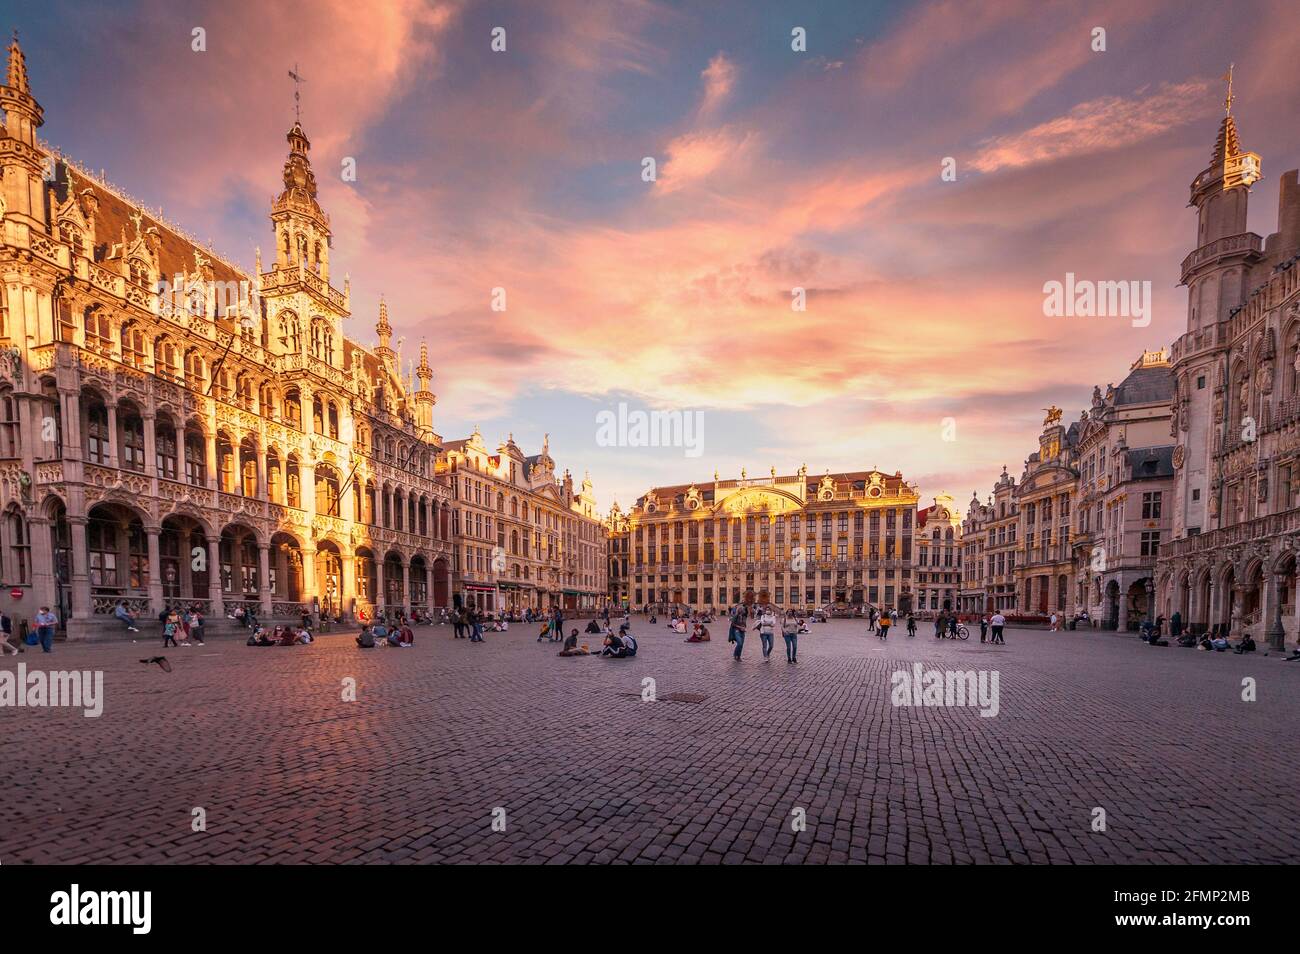 Central Brussels during a sunset Stock Photo